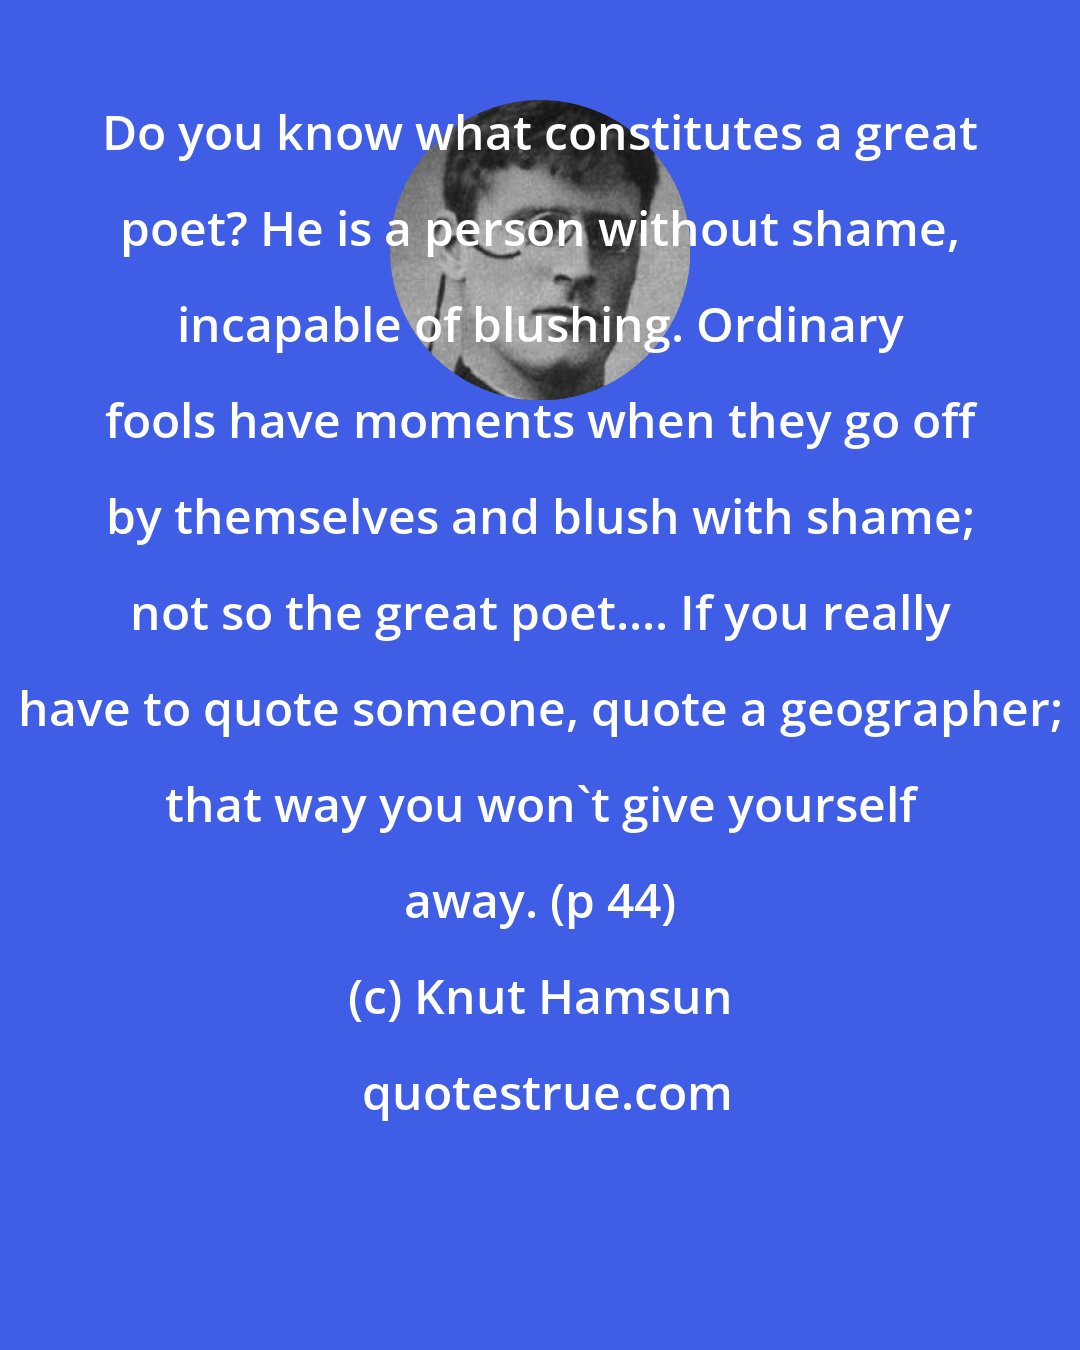 Knut Hamsun: Do you know what constitutes a great poet? He is a person without shame, incapable of blushing. Ordinary fools have moments when they go off by themselves and blush with shame; not so the great poet.... If you really have to quote someone, quote a geographer; that way you won't give yourself away. (p 44)